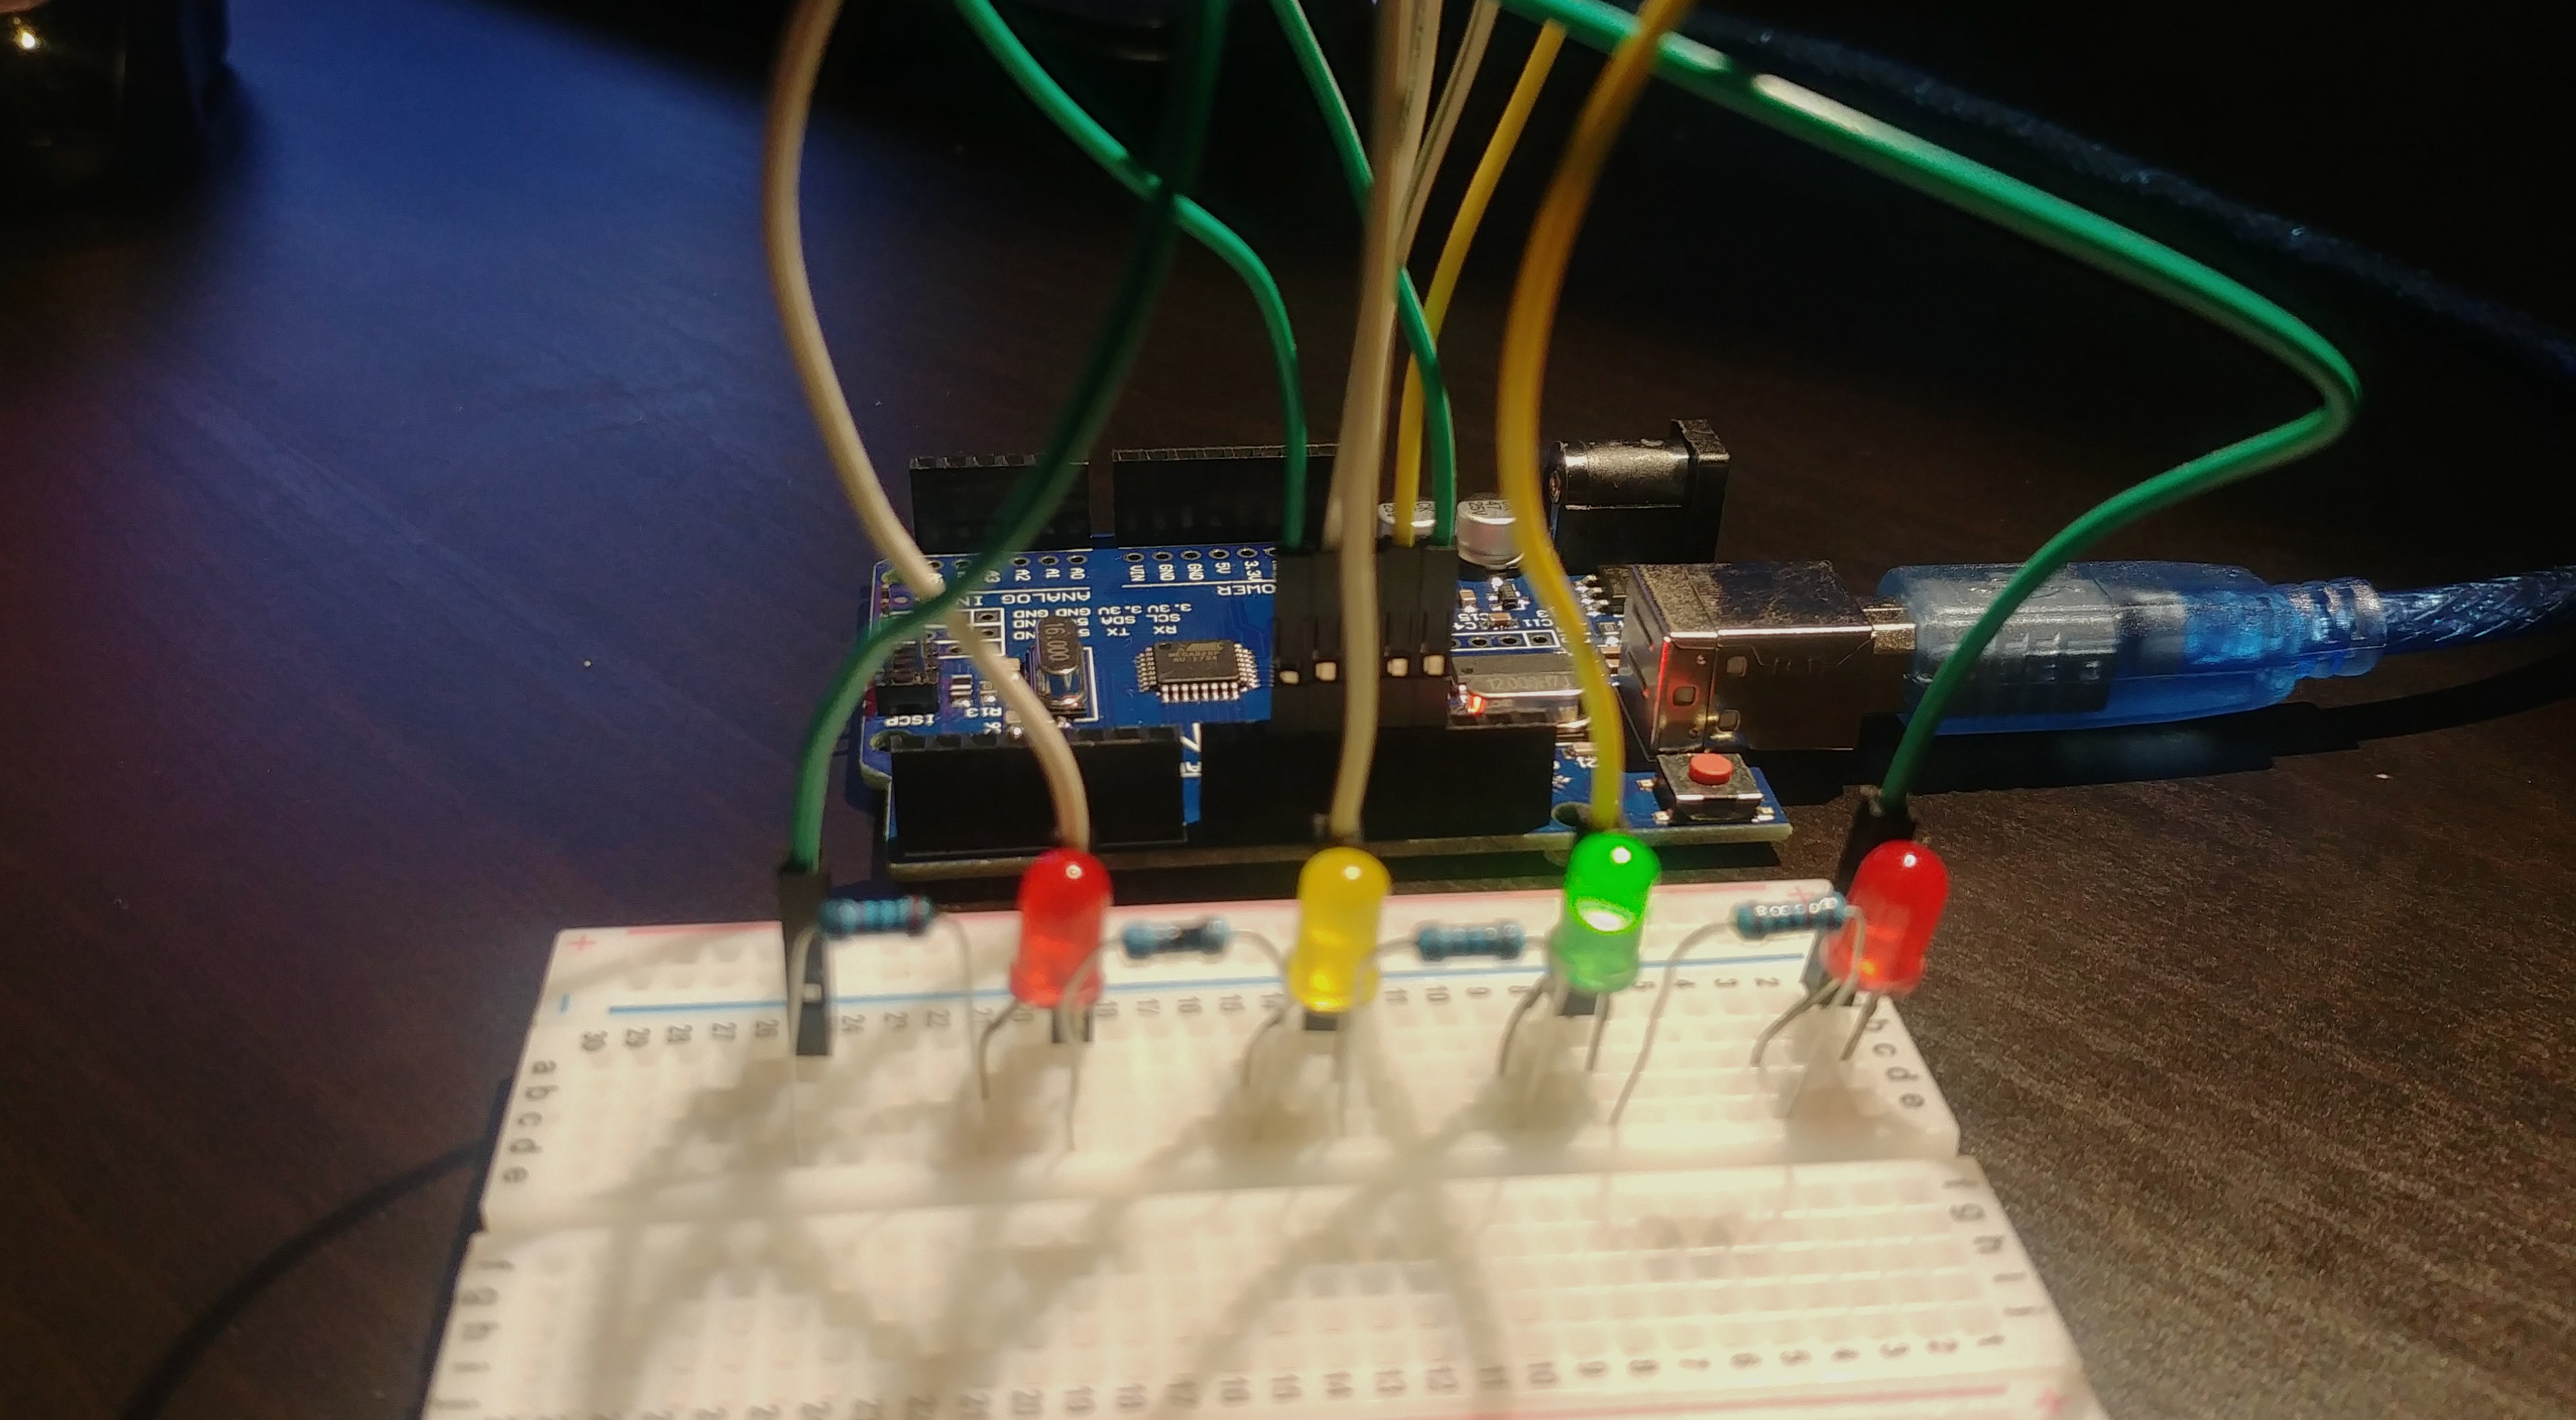 All actual LED’s wired to Arduino